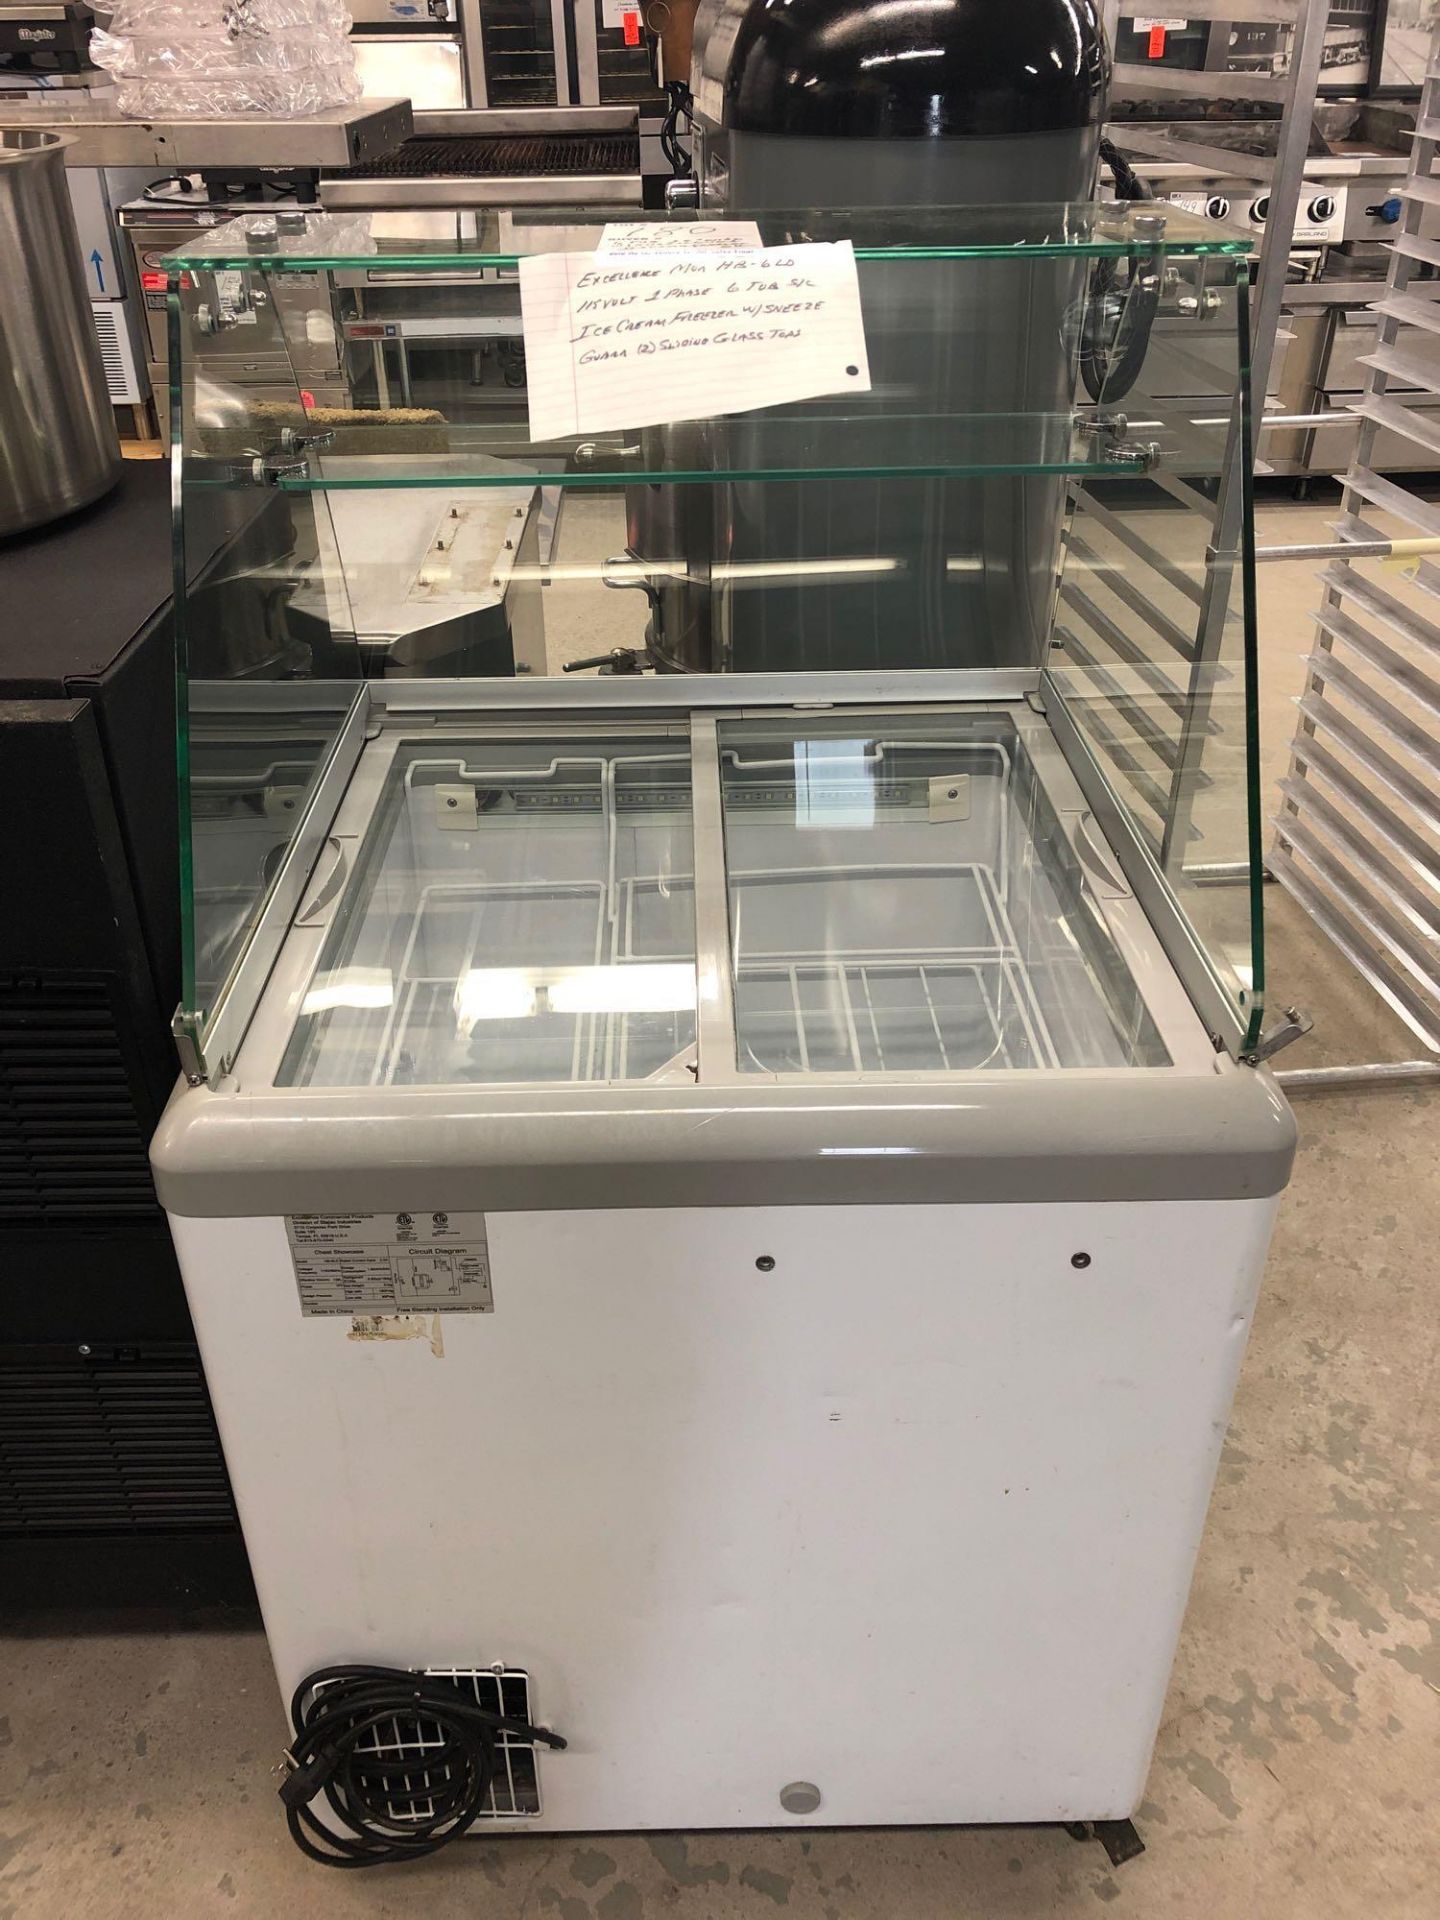 Excellence model HP 6LD ice cream freezer with glass shield